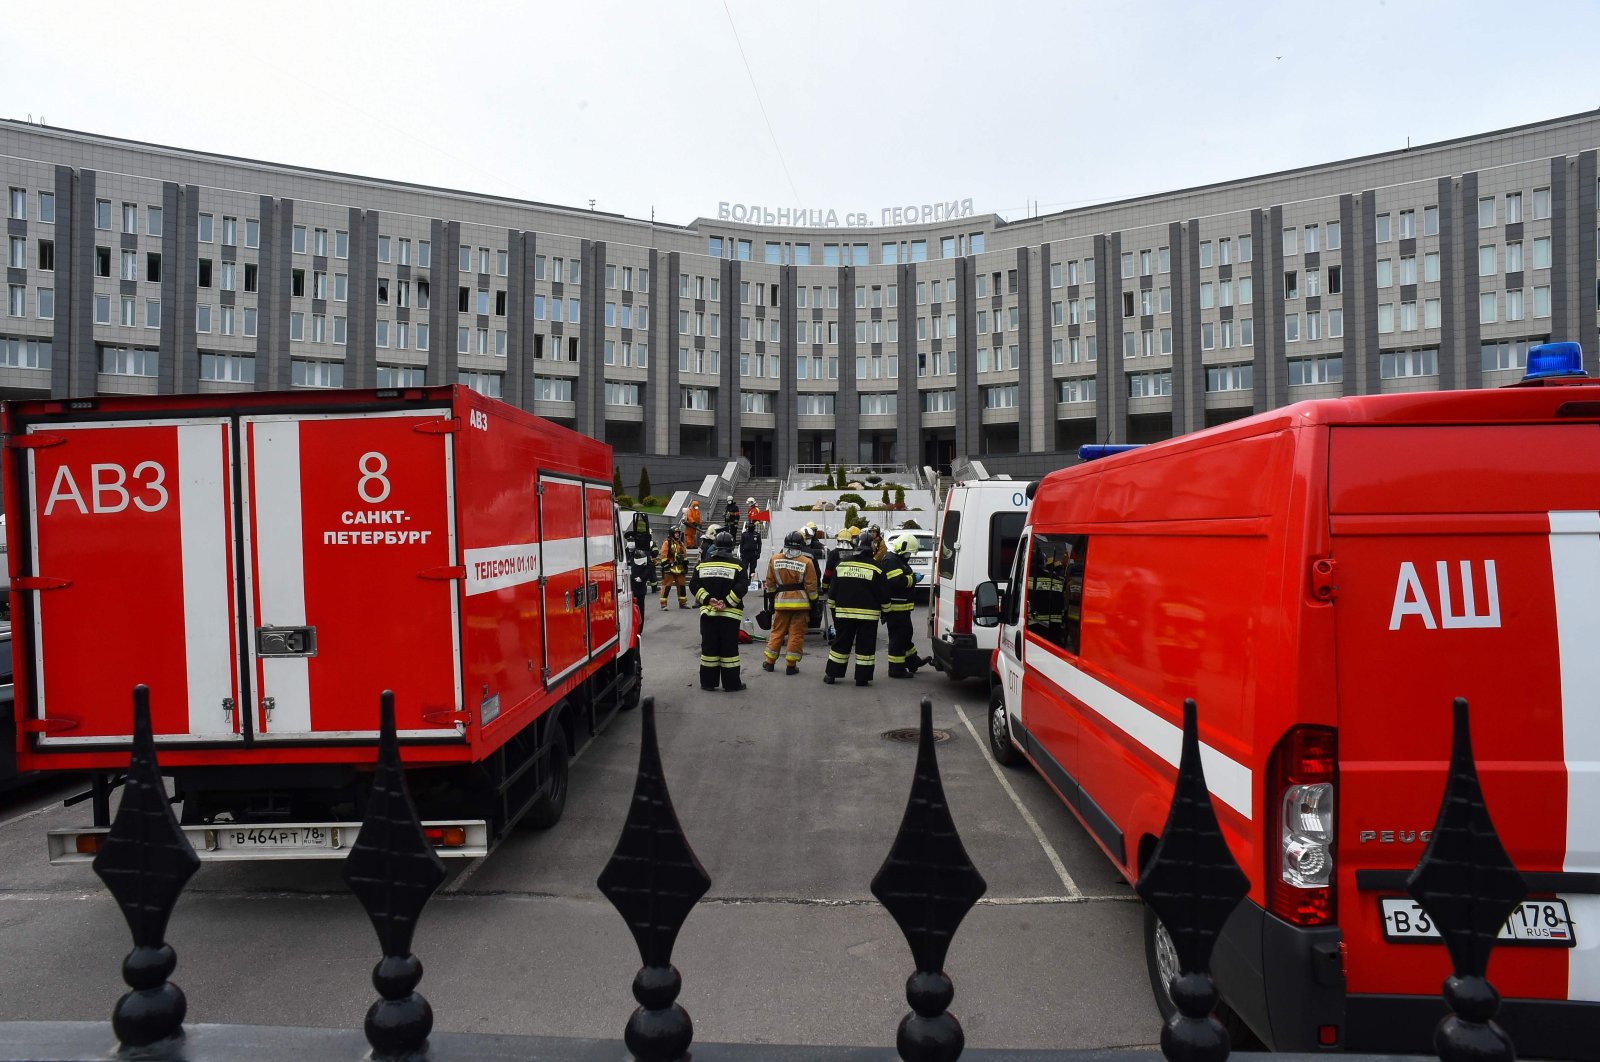 Emergencies personnel work at the site of a fire at the St. George hospital in St. Petersburg, Russia, May 12, 2020. (AFP Photo)